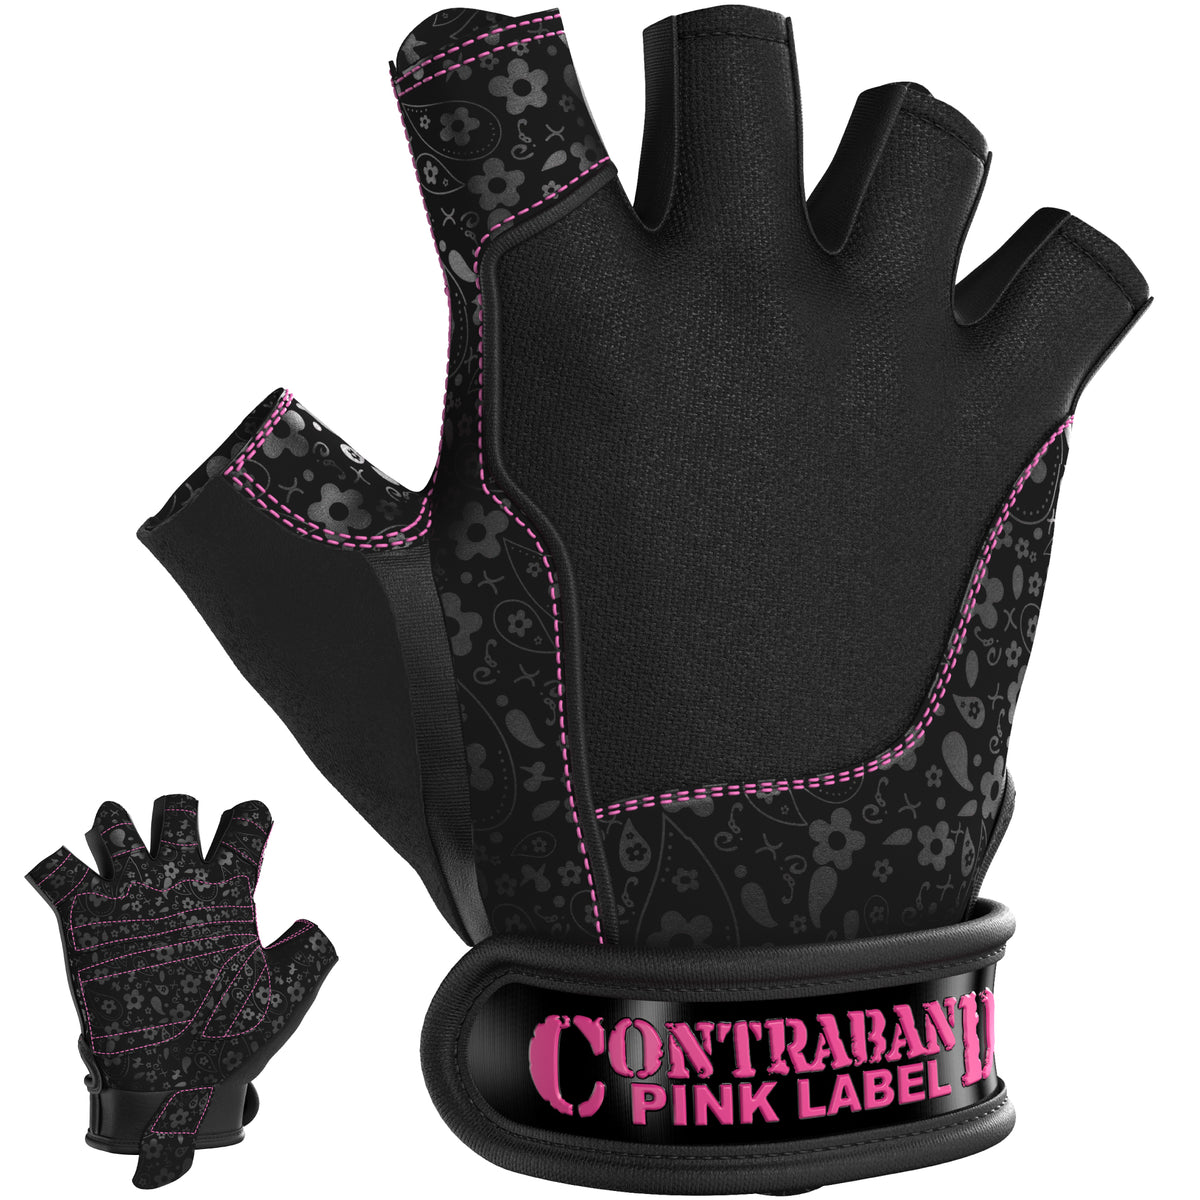 Contraband Pink Label 5127 Womens Vegan Weight Lifting Gloves w/Synthetic Microfiber Amara Leather